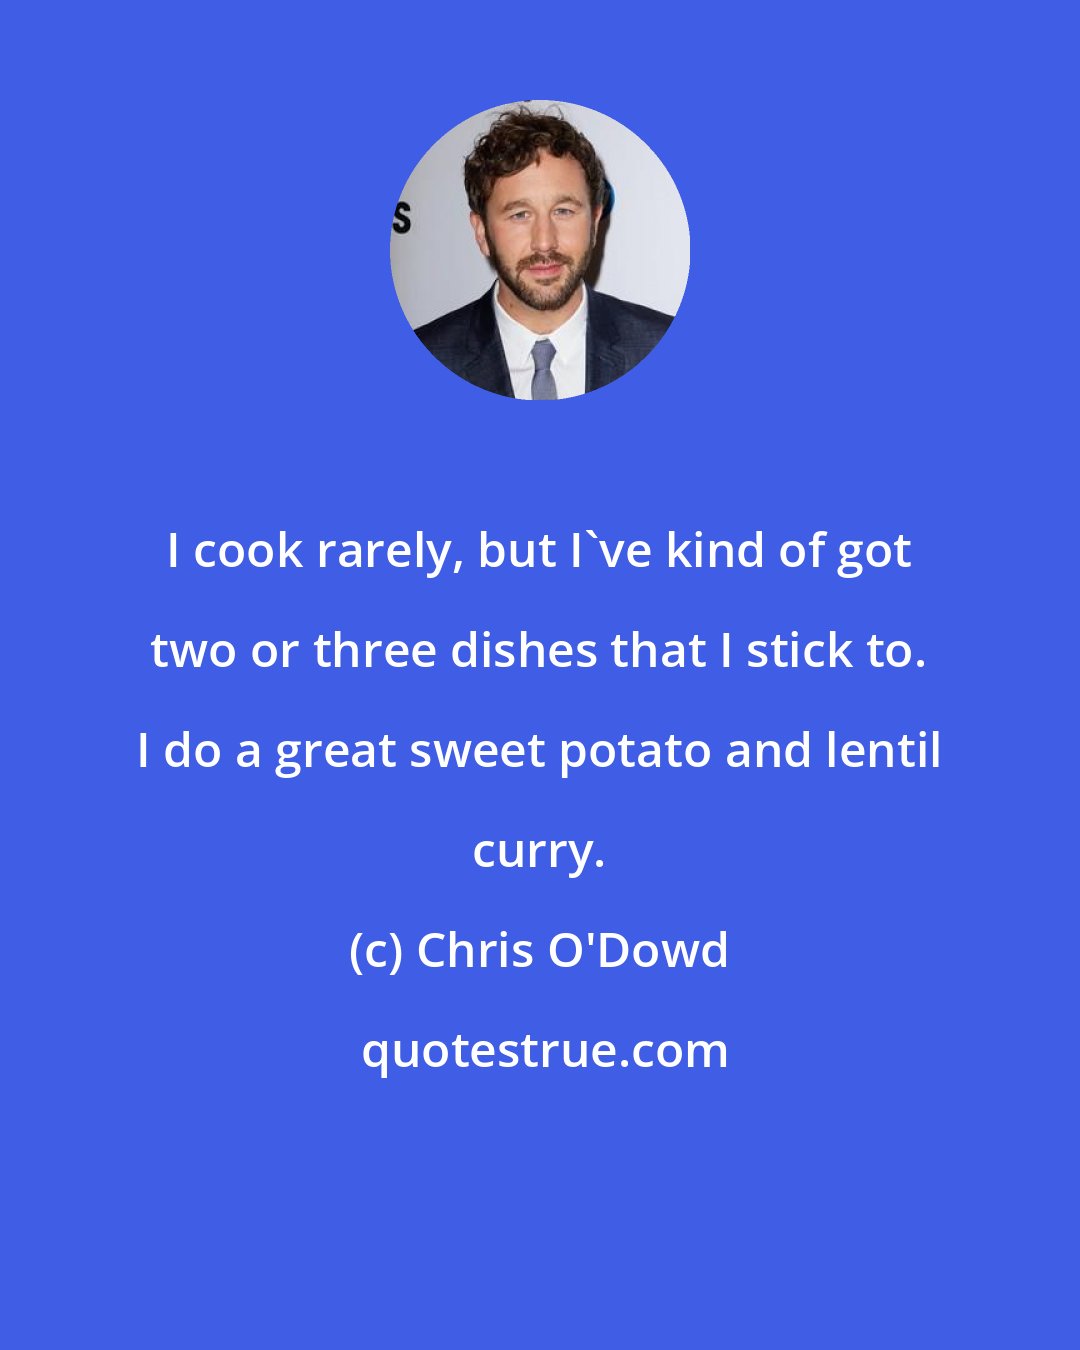 Chris O'Dowd: I cook rarely, but I've kind of got two or three dishes that I stick to. I do a great sweet potato and lentil curry.